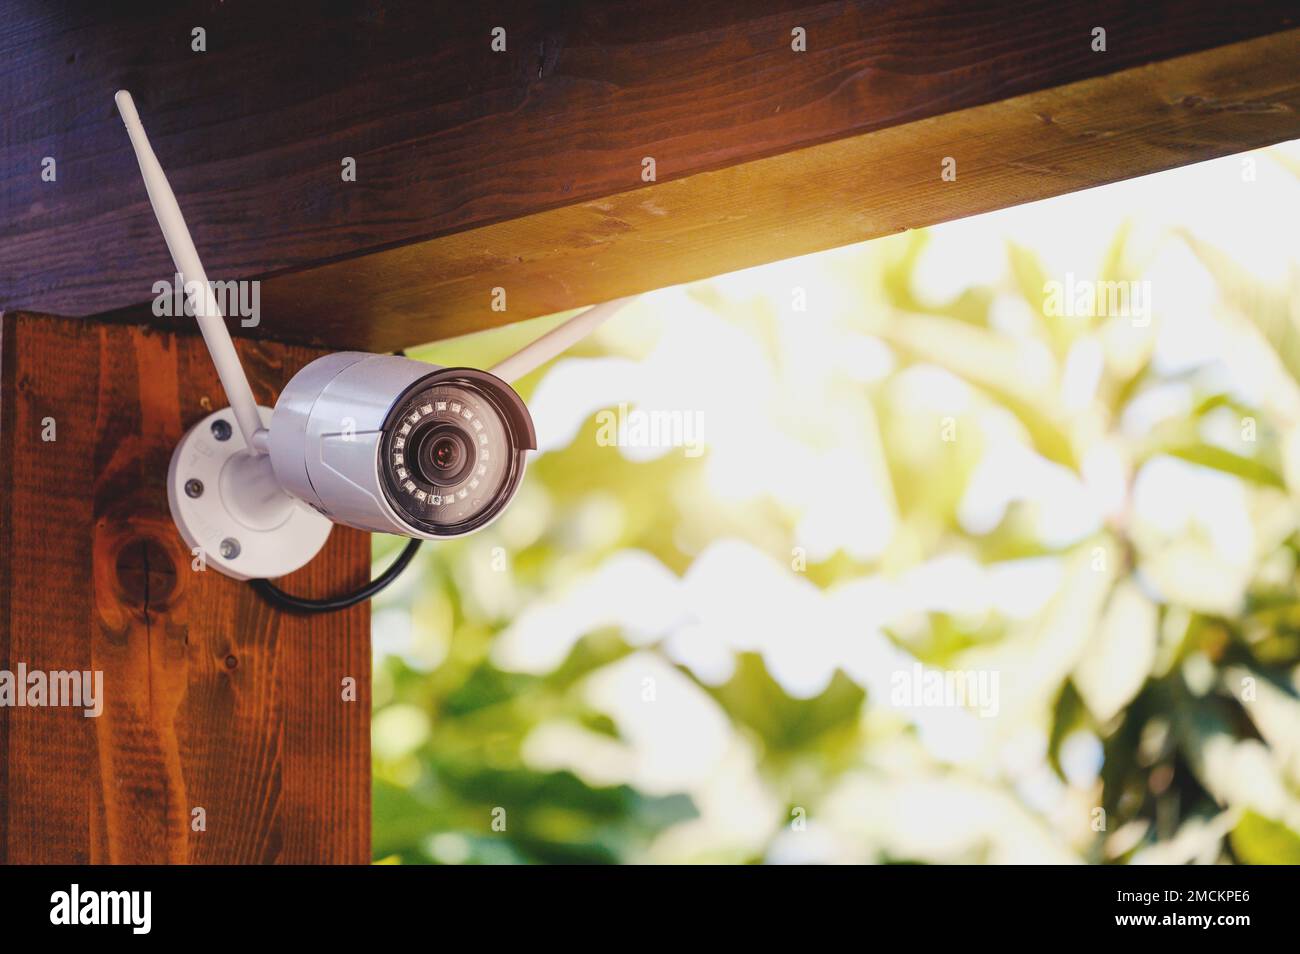 Wireless ip camera monitors an house to prevent theft Stock Photo